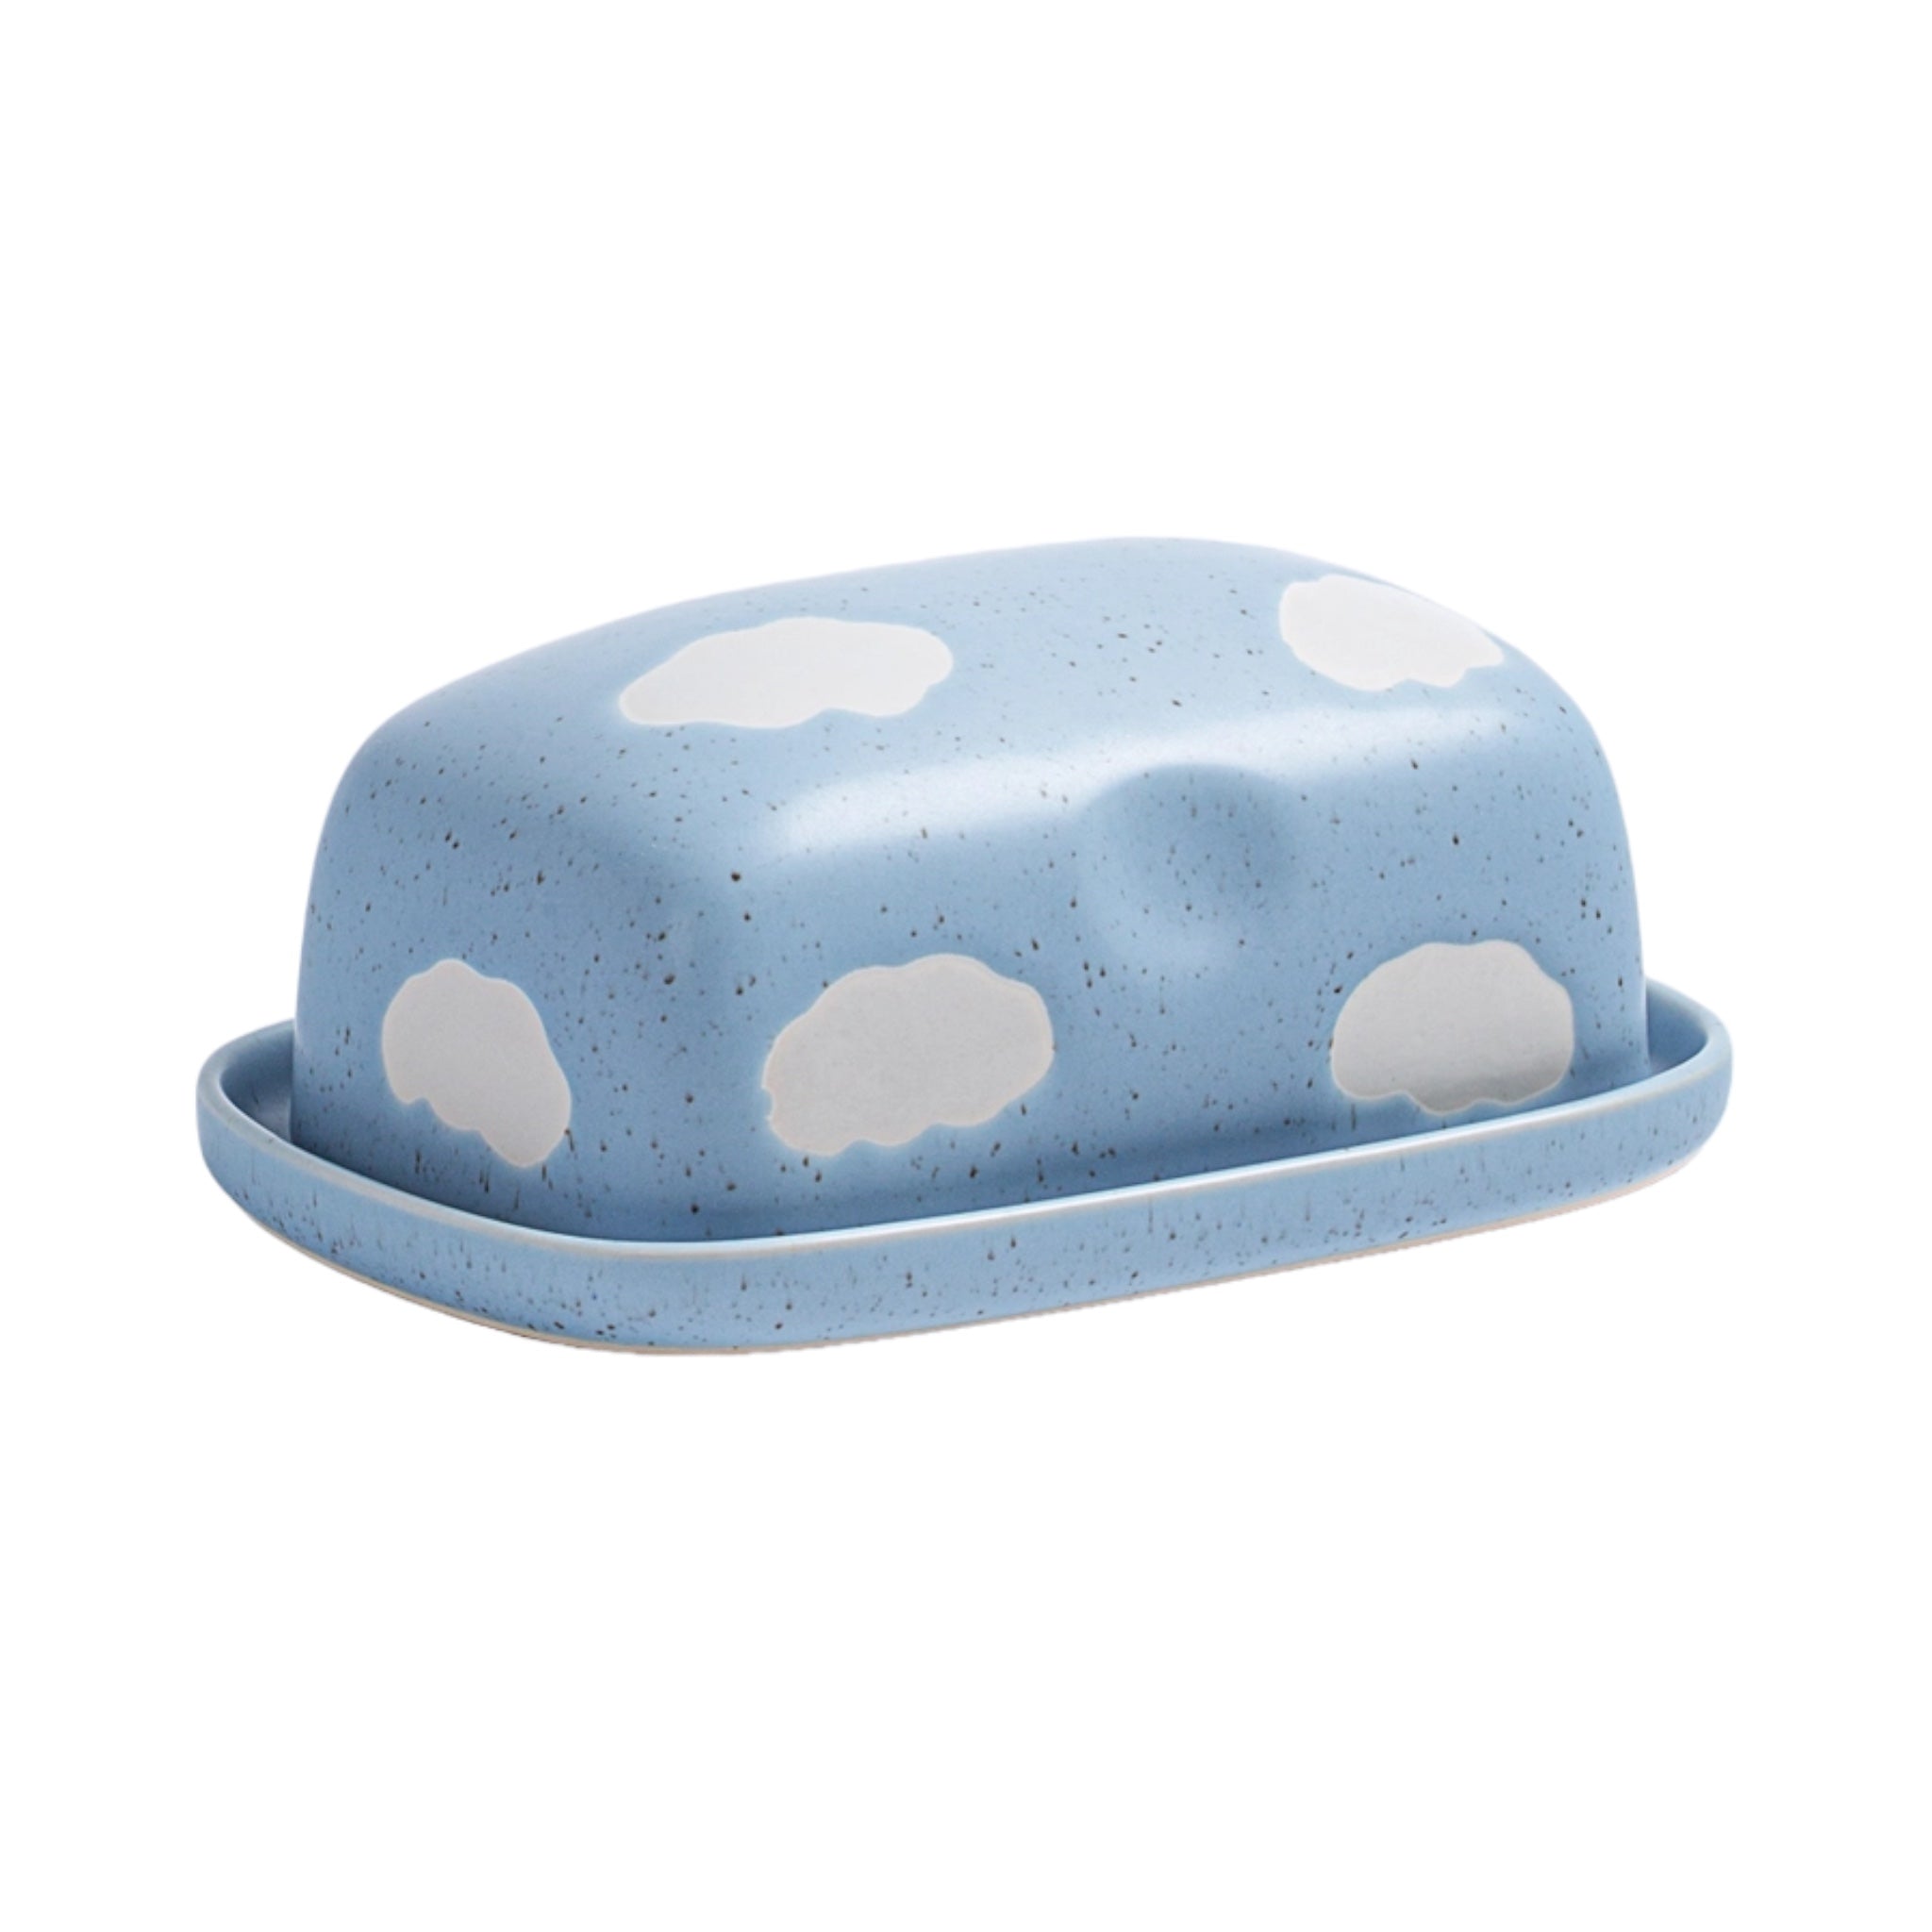 CLOUD BUTTER DISH NEW EDITION